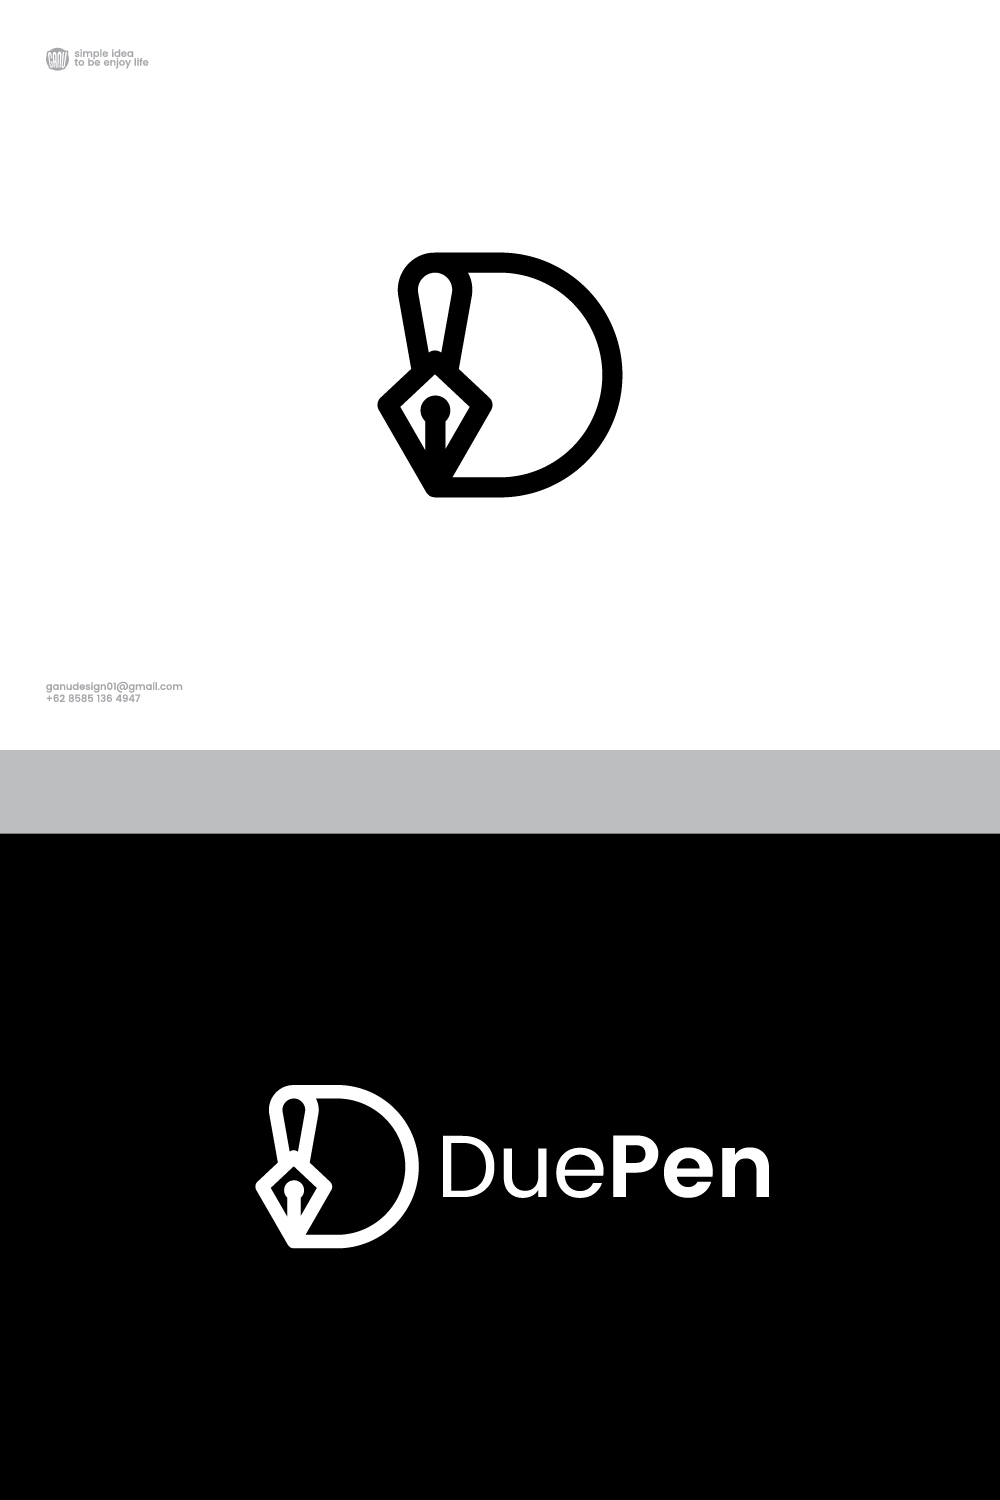 D letter logo with pen tool pinterest preview image.